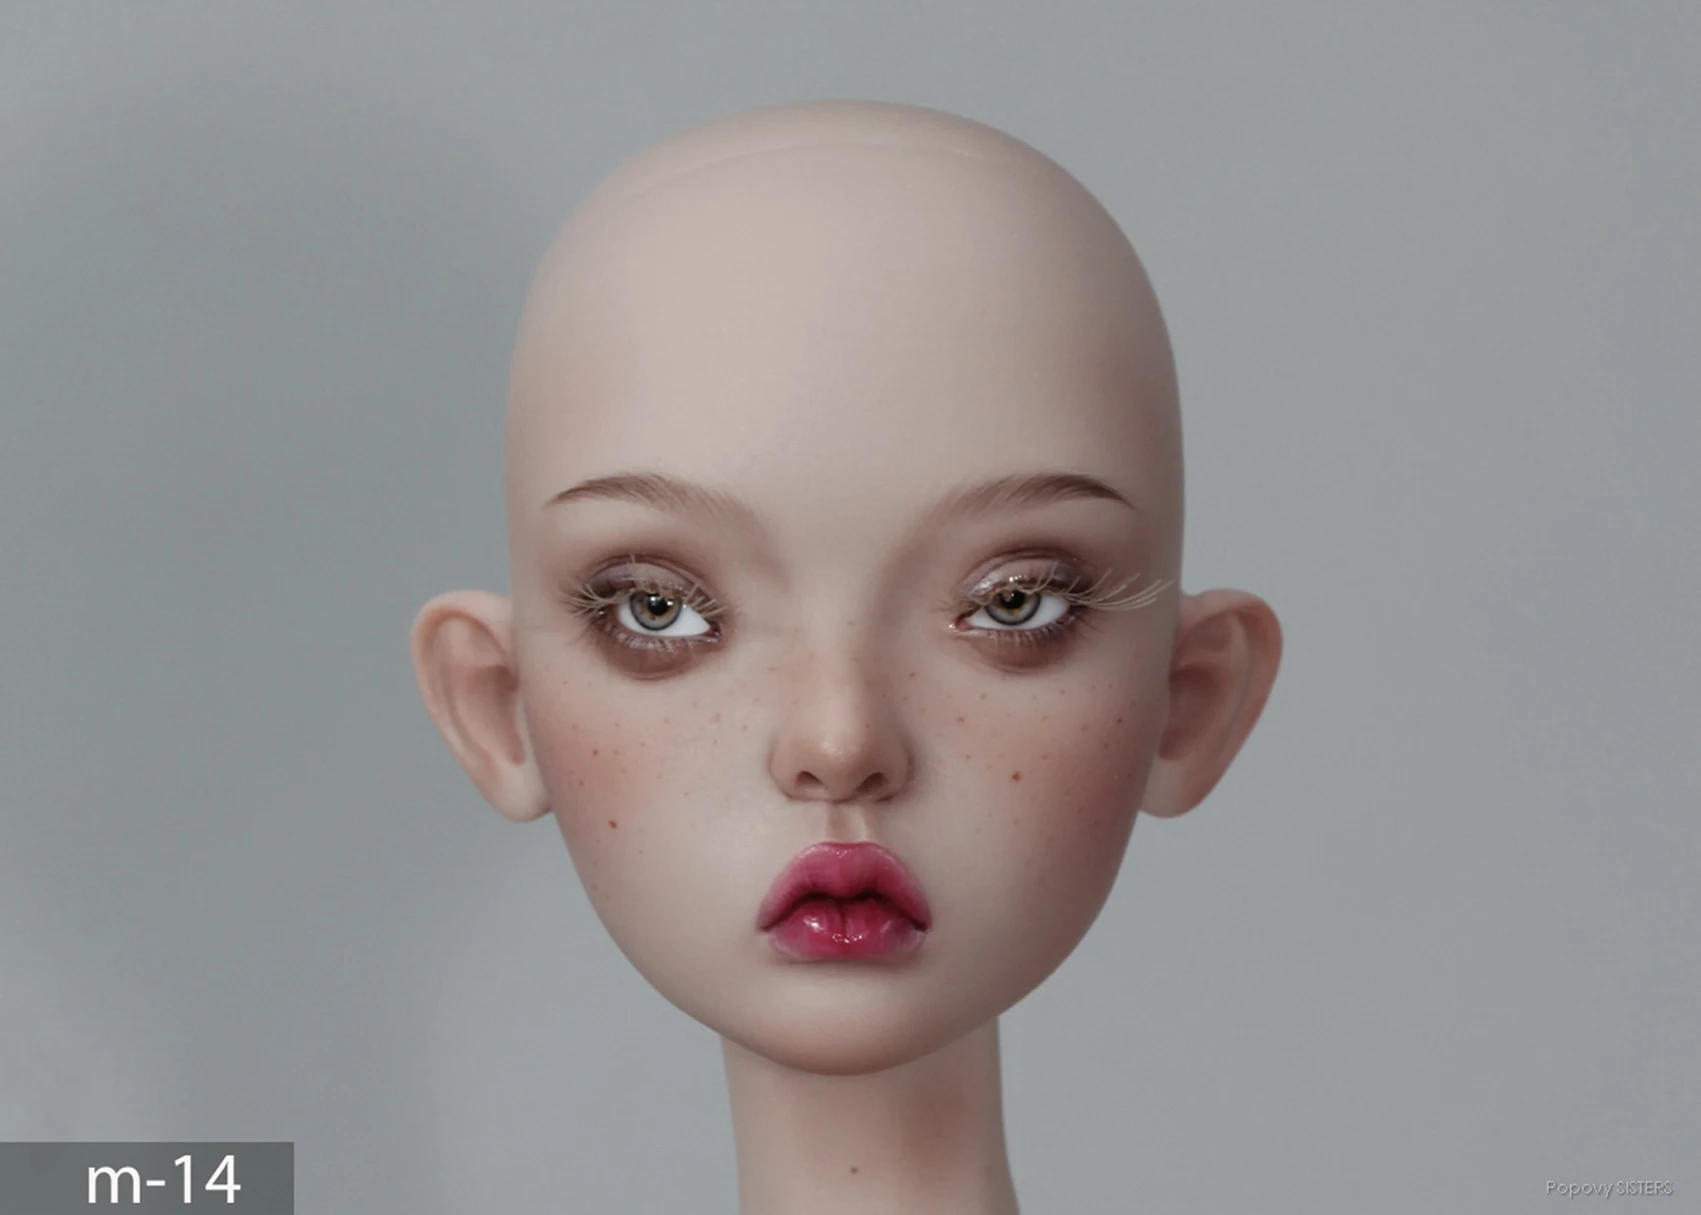 bjd-sd-doll-1-4-popovie-doll-a-birthday-present-high-quality-articulated-puppet-toys-gift-dolly-model-nude-collection